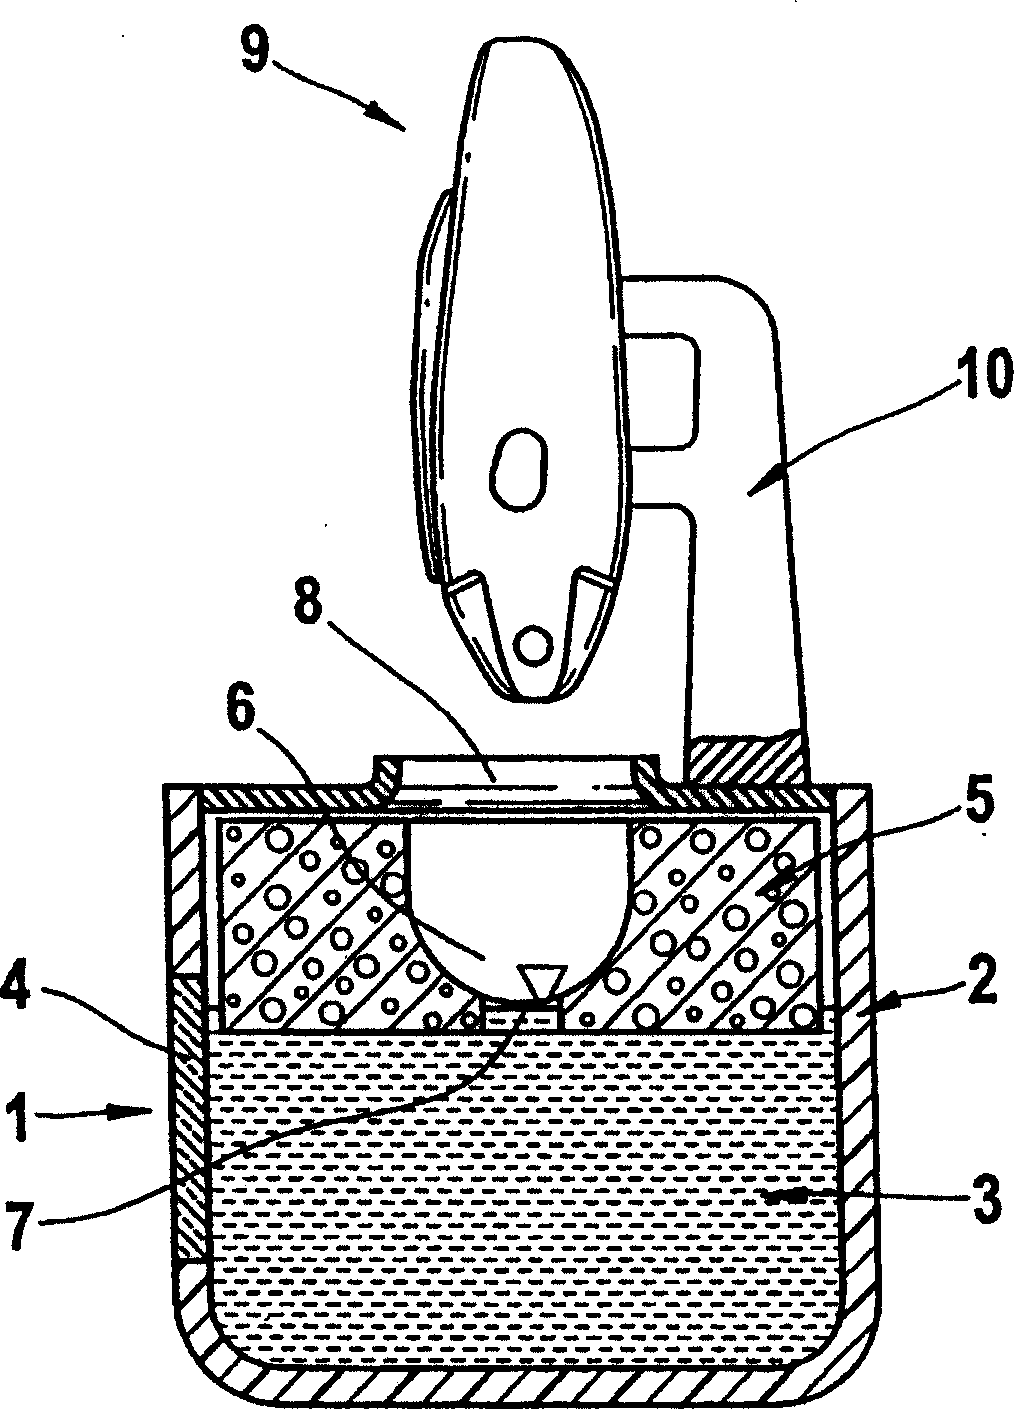 Cleaning device for a shaving apparatus